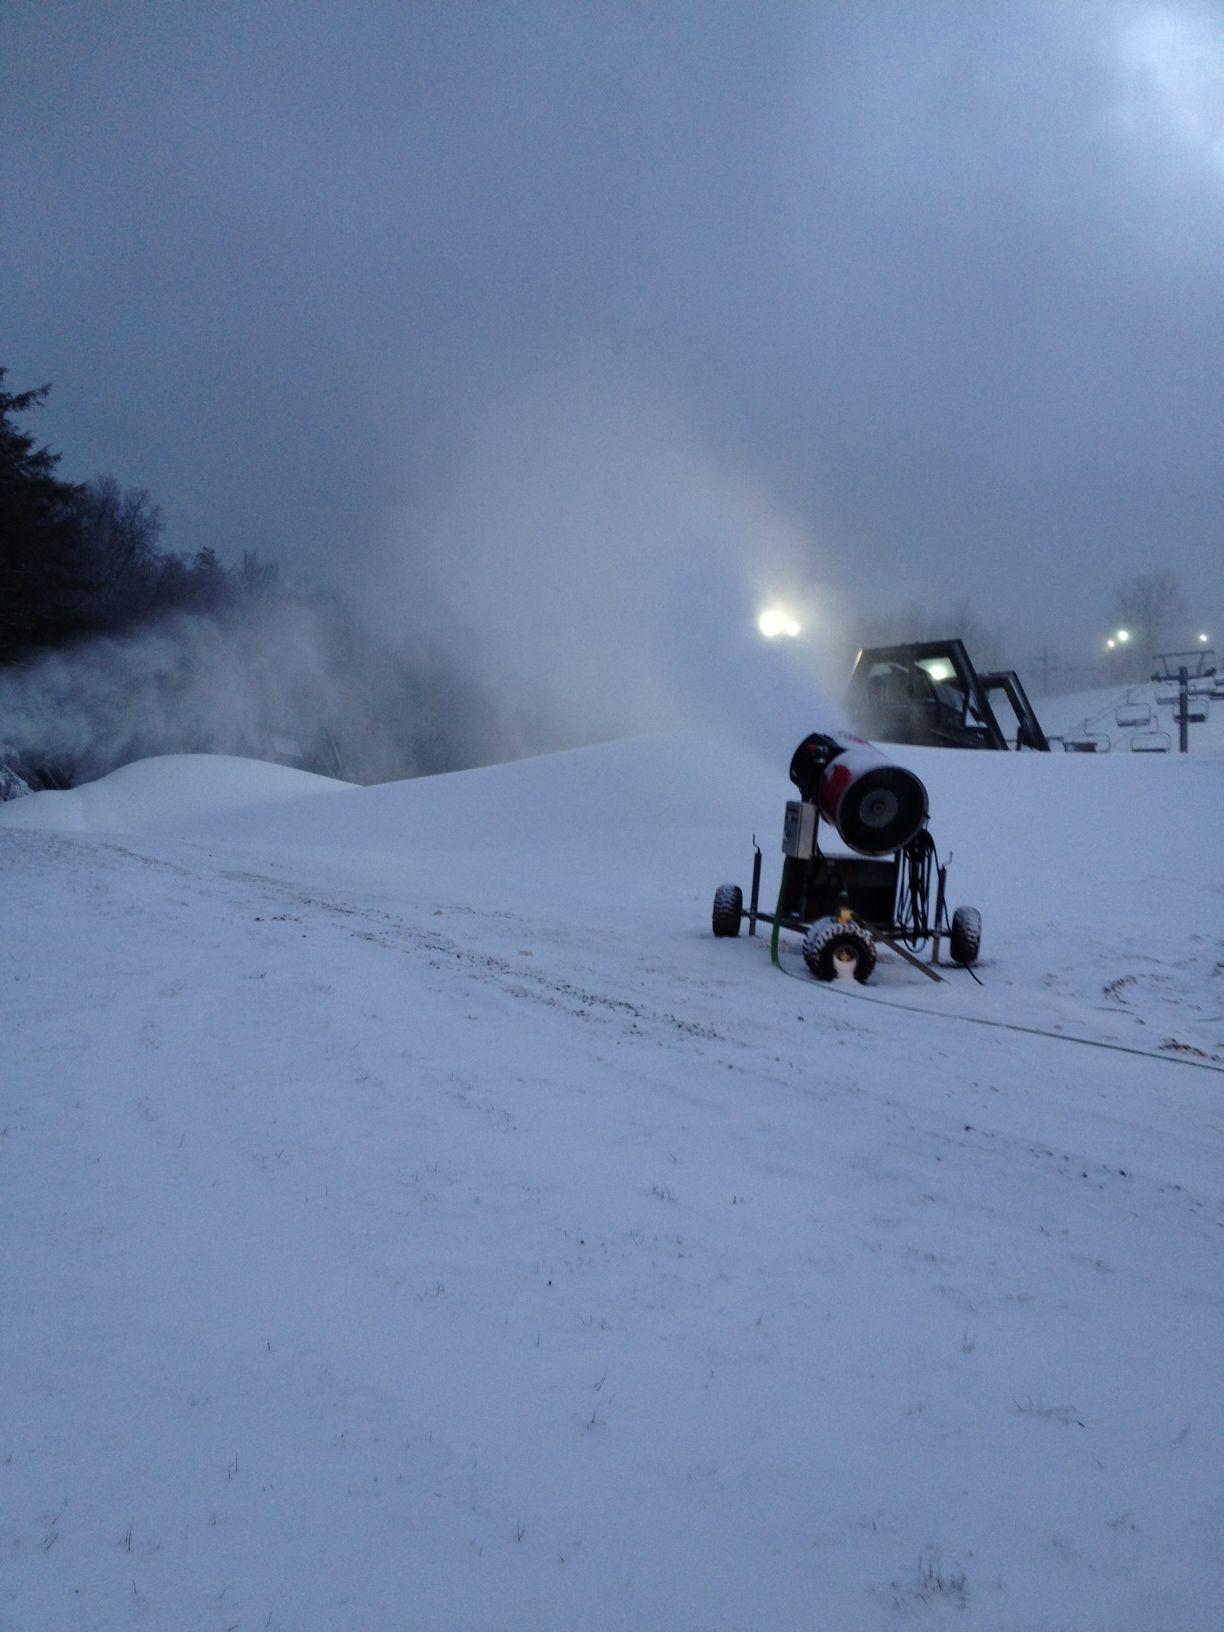 TF10 snow guns add snow to the slopes at Canaan Valley Resort State Park